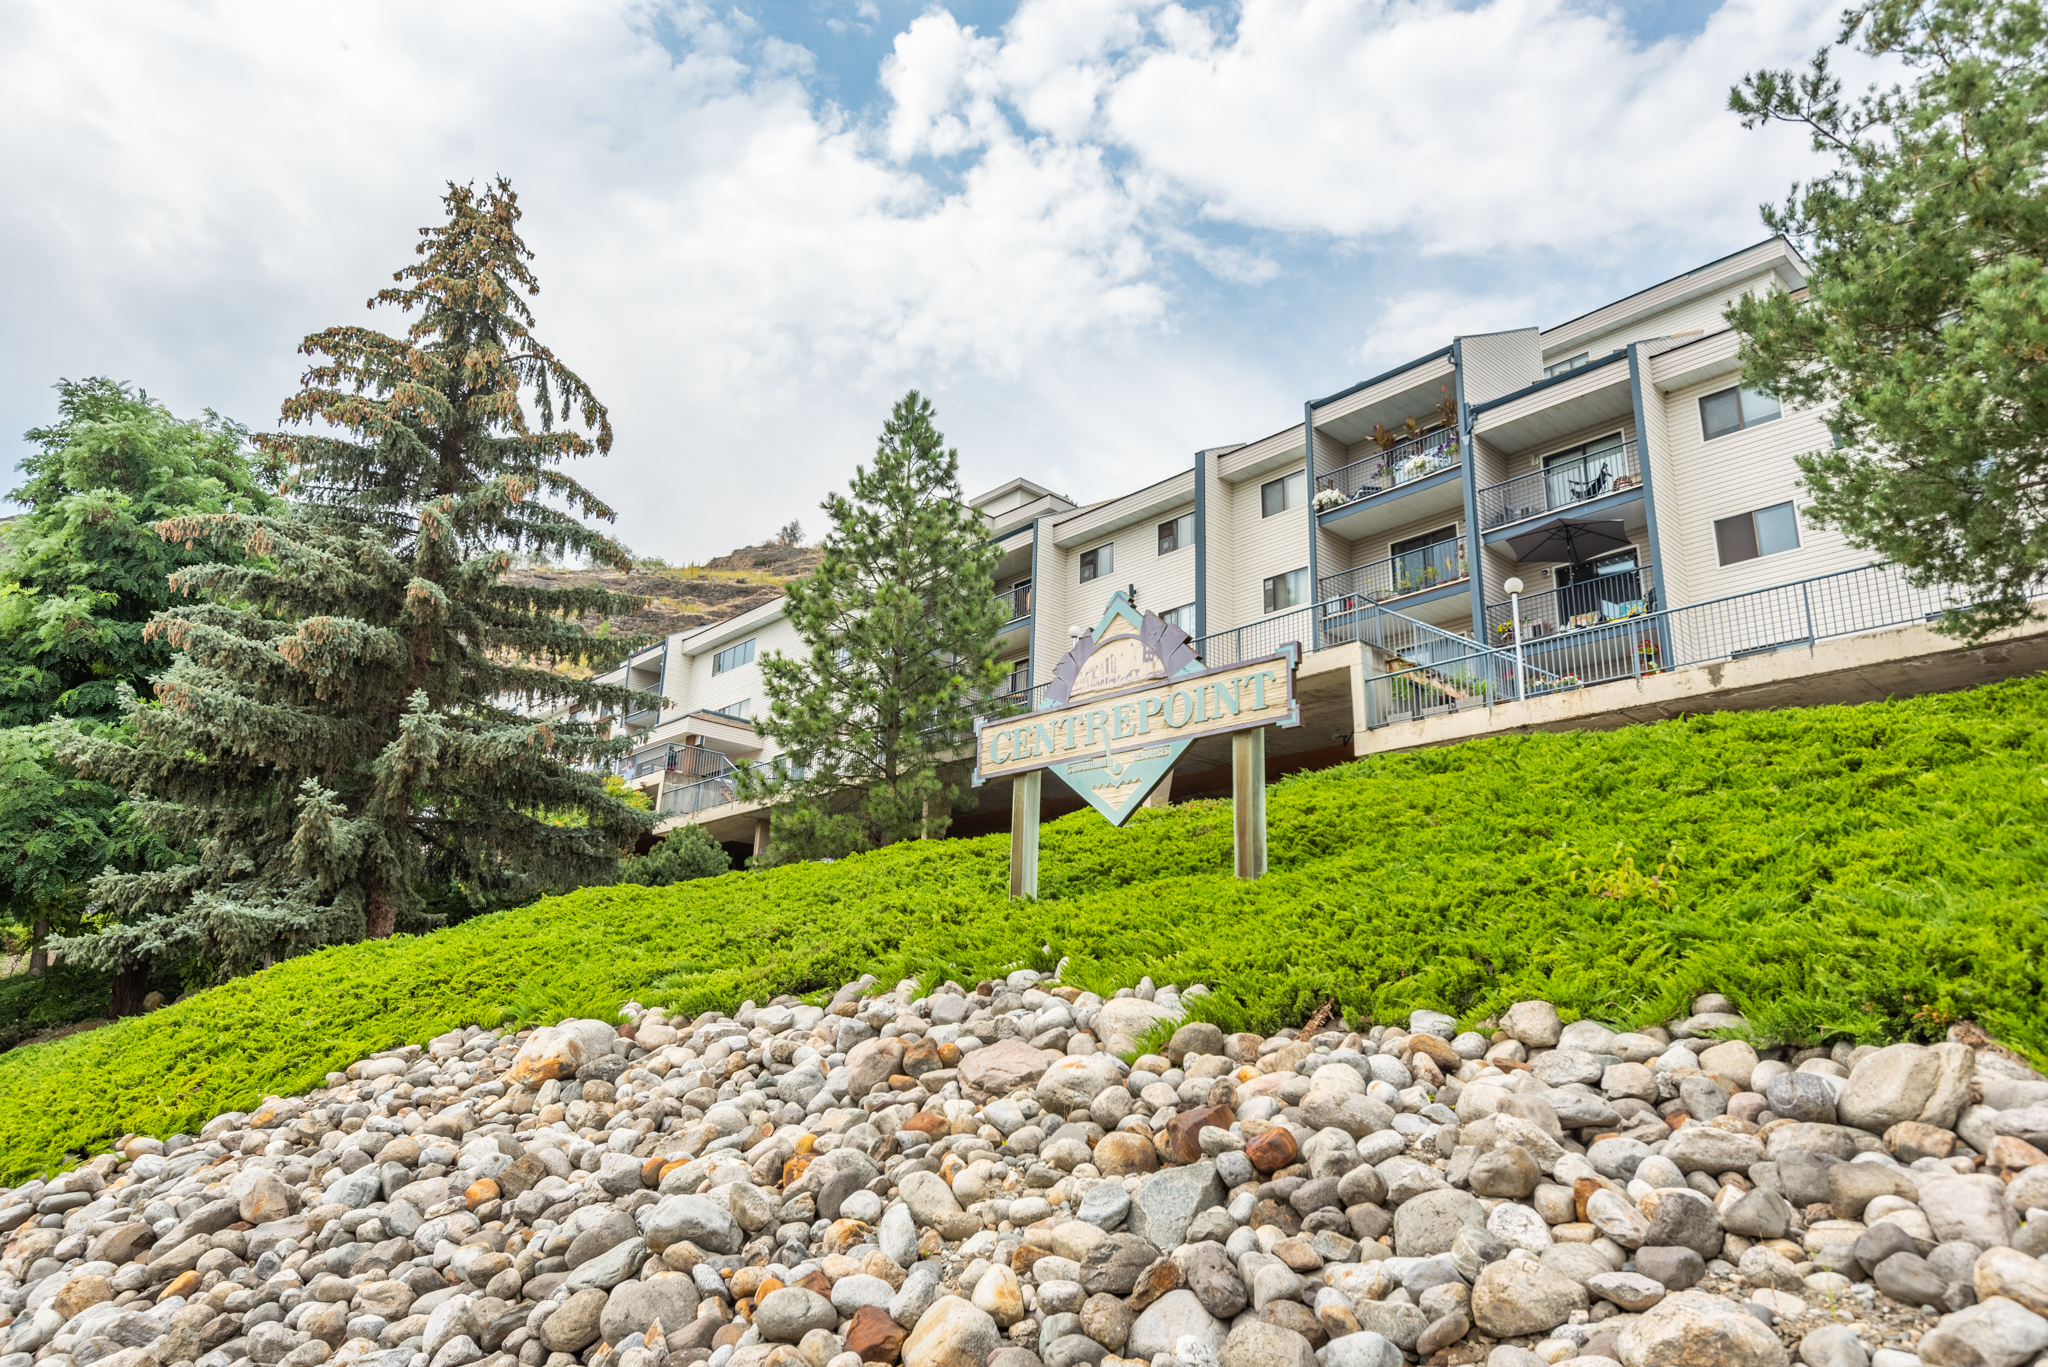 #308 3901 32nd Ave | Vernon, BC | $279,000